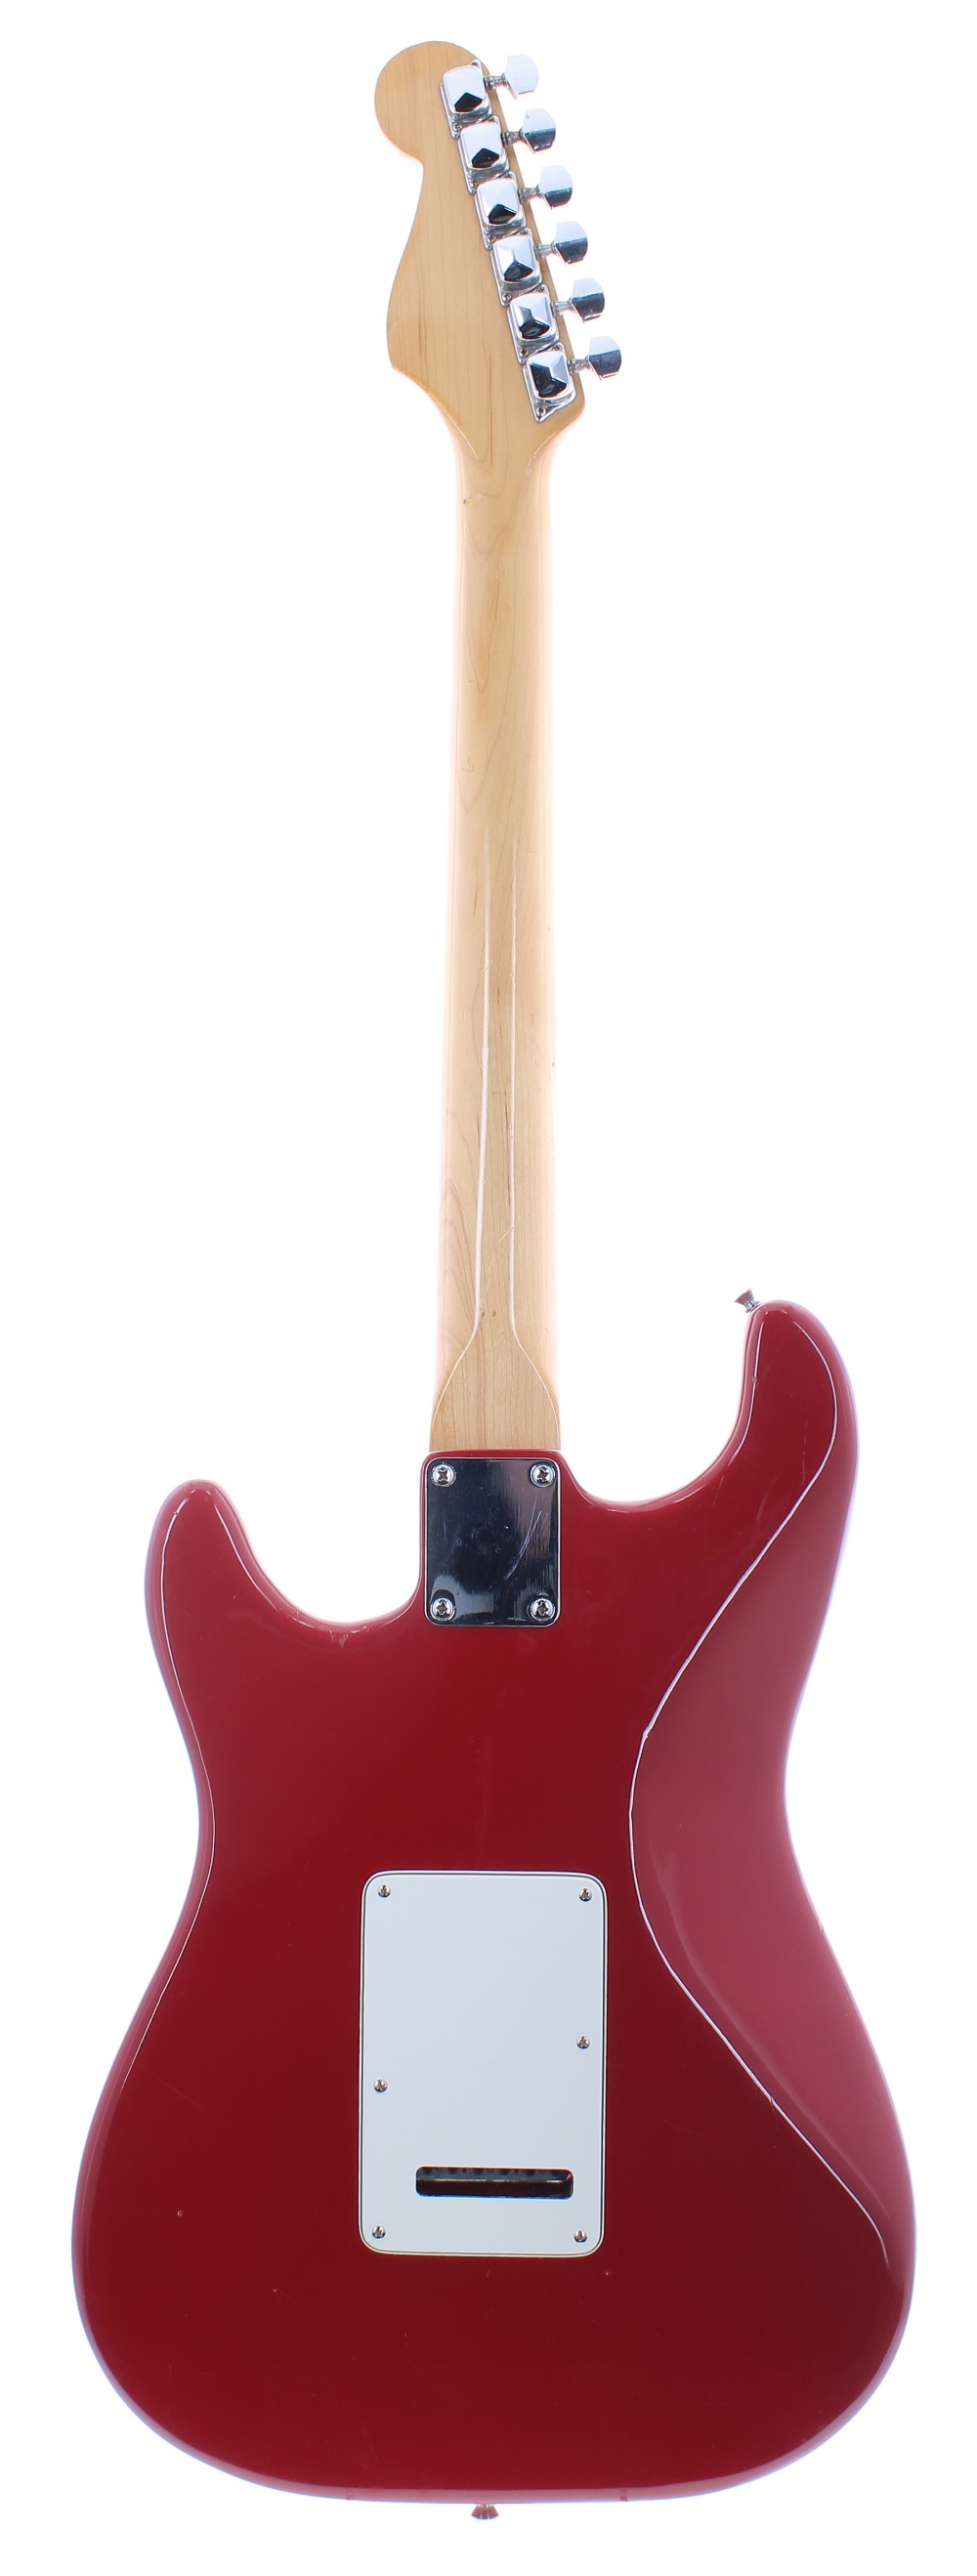 Sunn Mustang electric guitar, made in India; Finish: red, various dings and marks; Fretboard: - Image 2 of 2